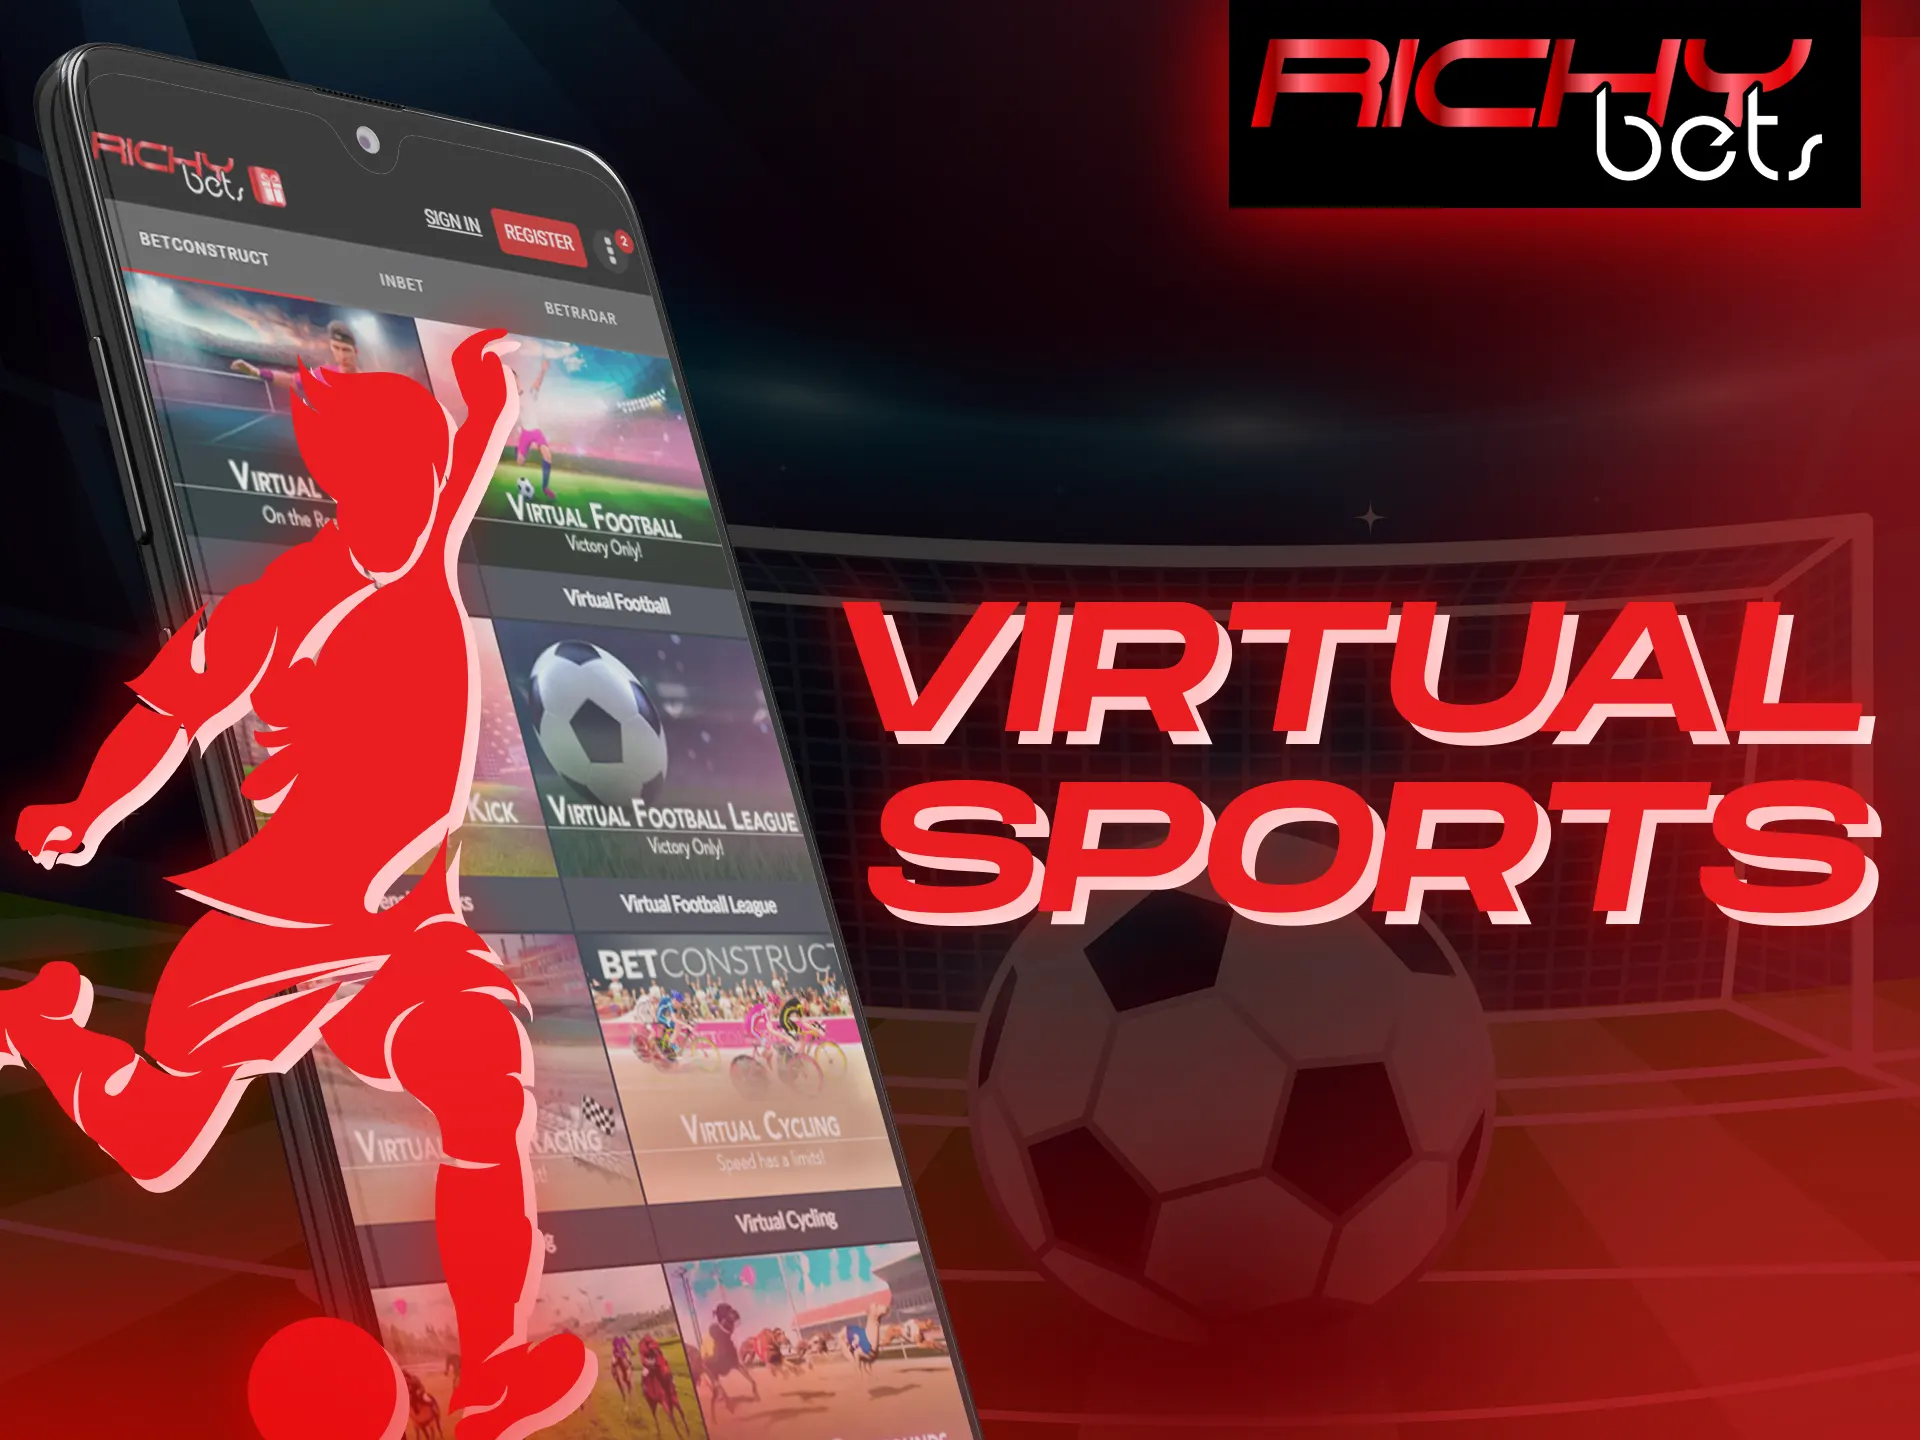 Bet on the most exotic Richybets sports in the app.